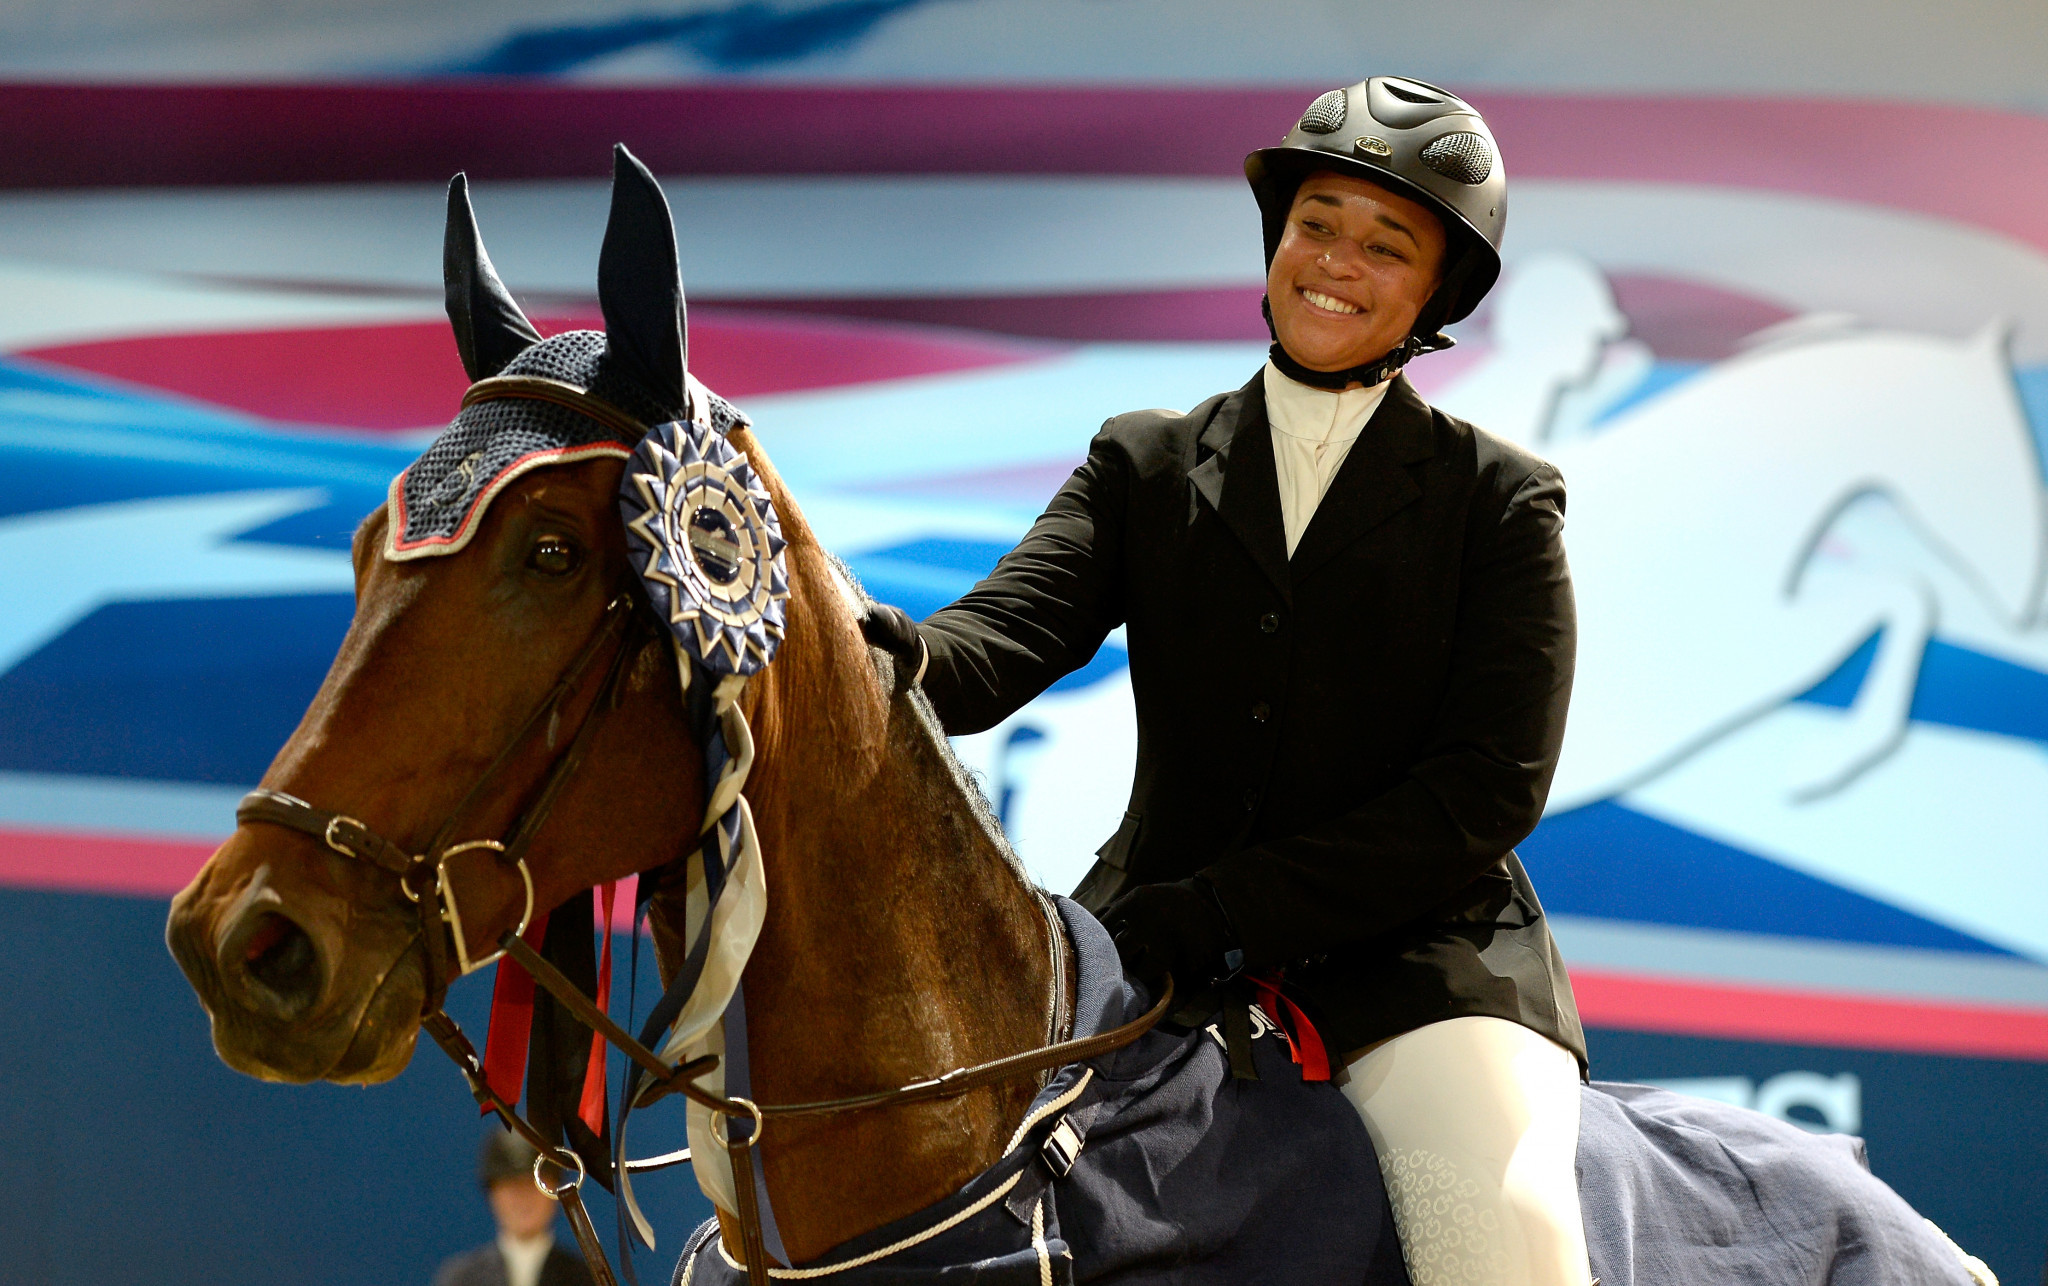 American jumper Paige Johnson has had her one-year ban by the International Equestrian Federation reduced to three months ©Getty Images